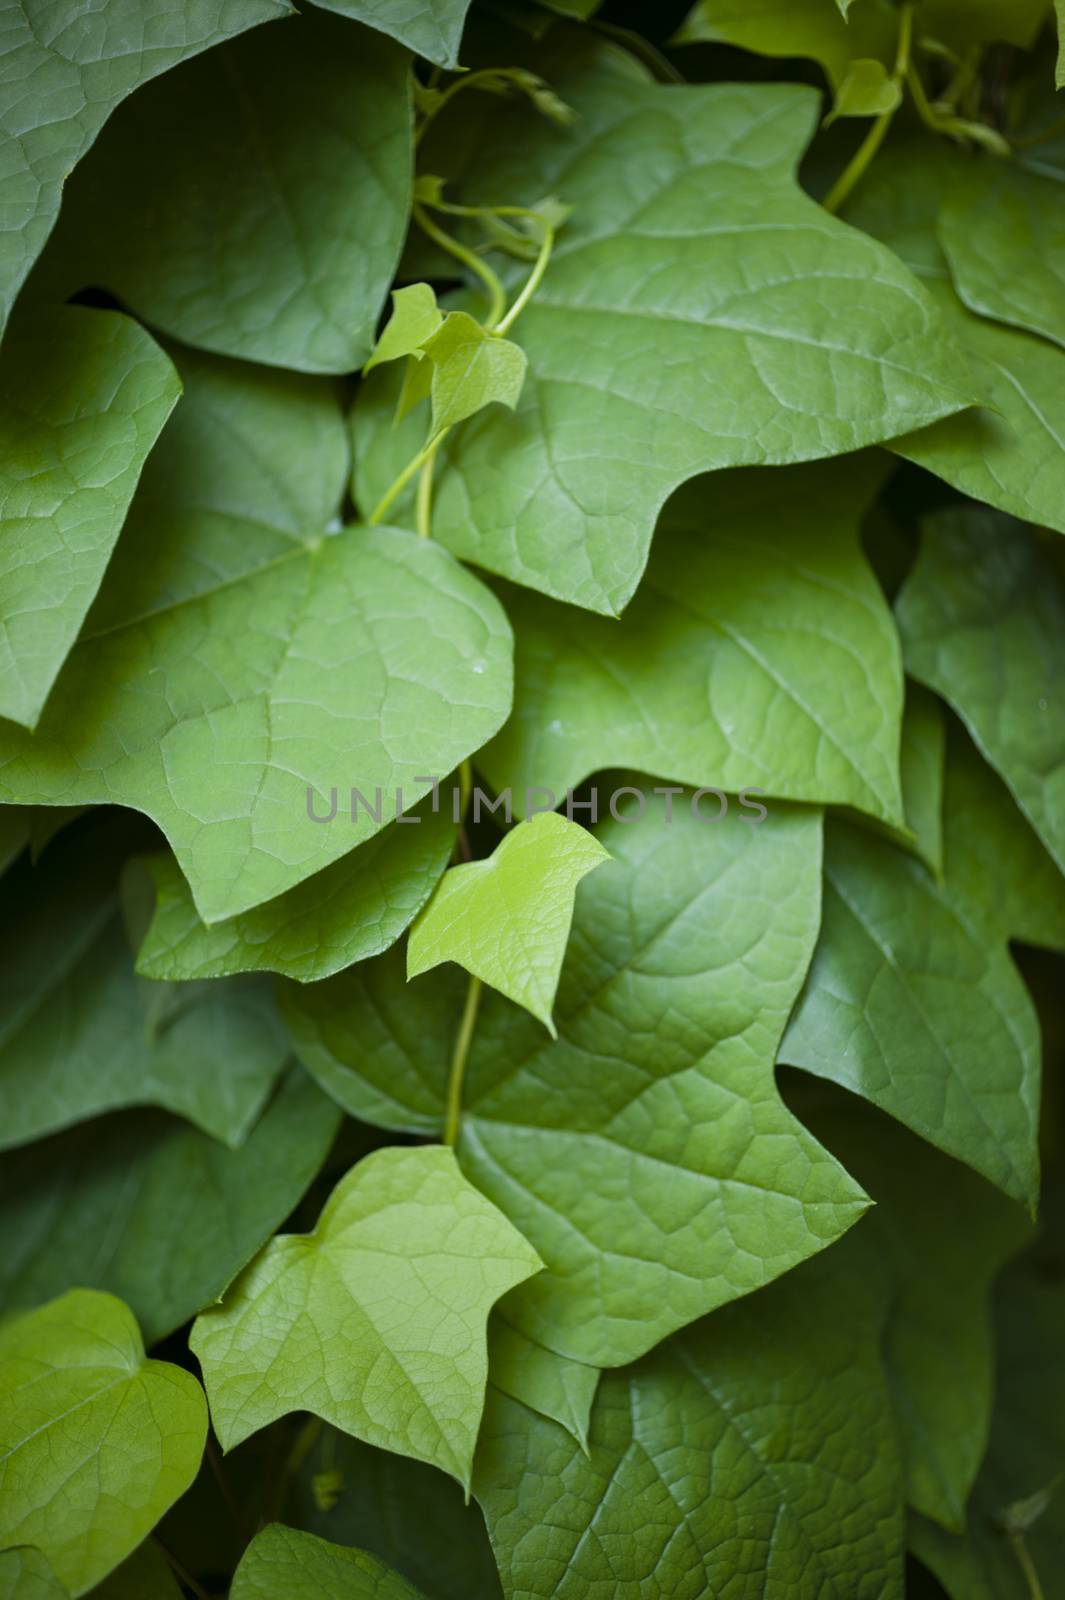 Hedera leavs, commonly called ivy, evergreen climbing or ground-creeping woody plants in the family Araliaceae